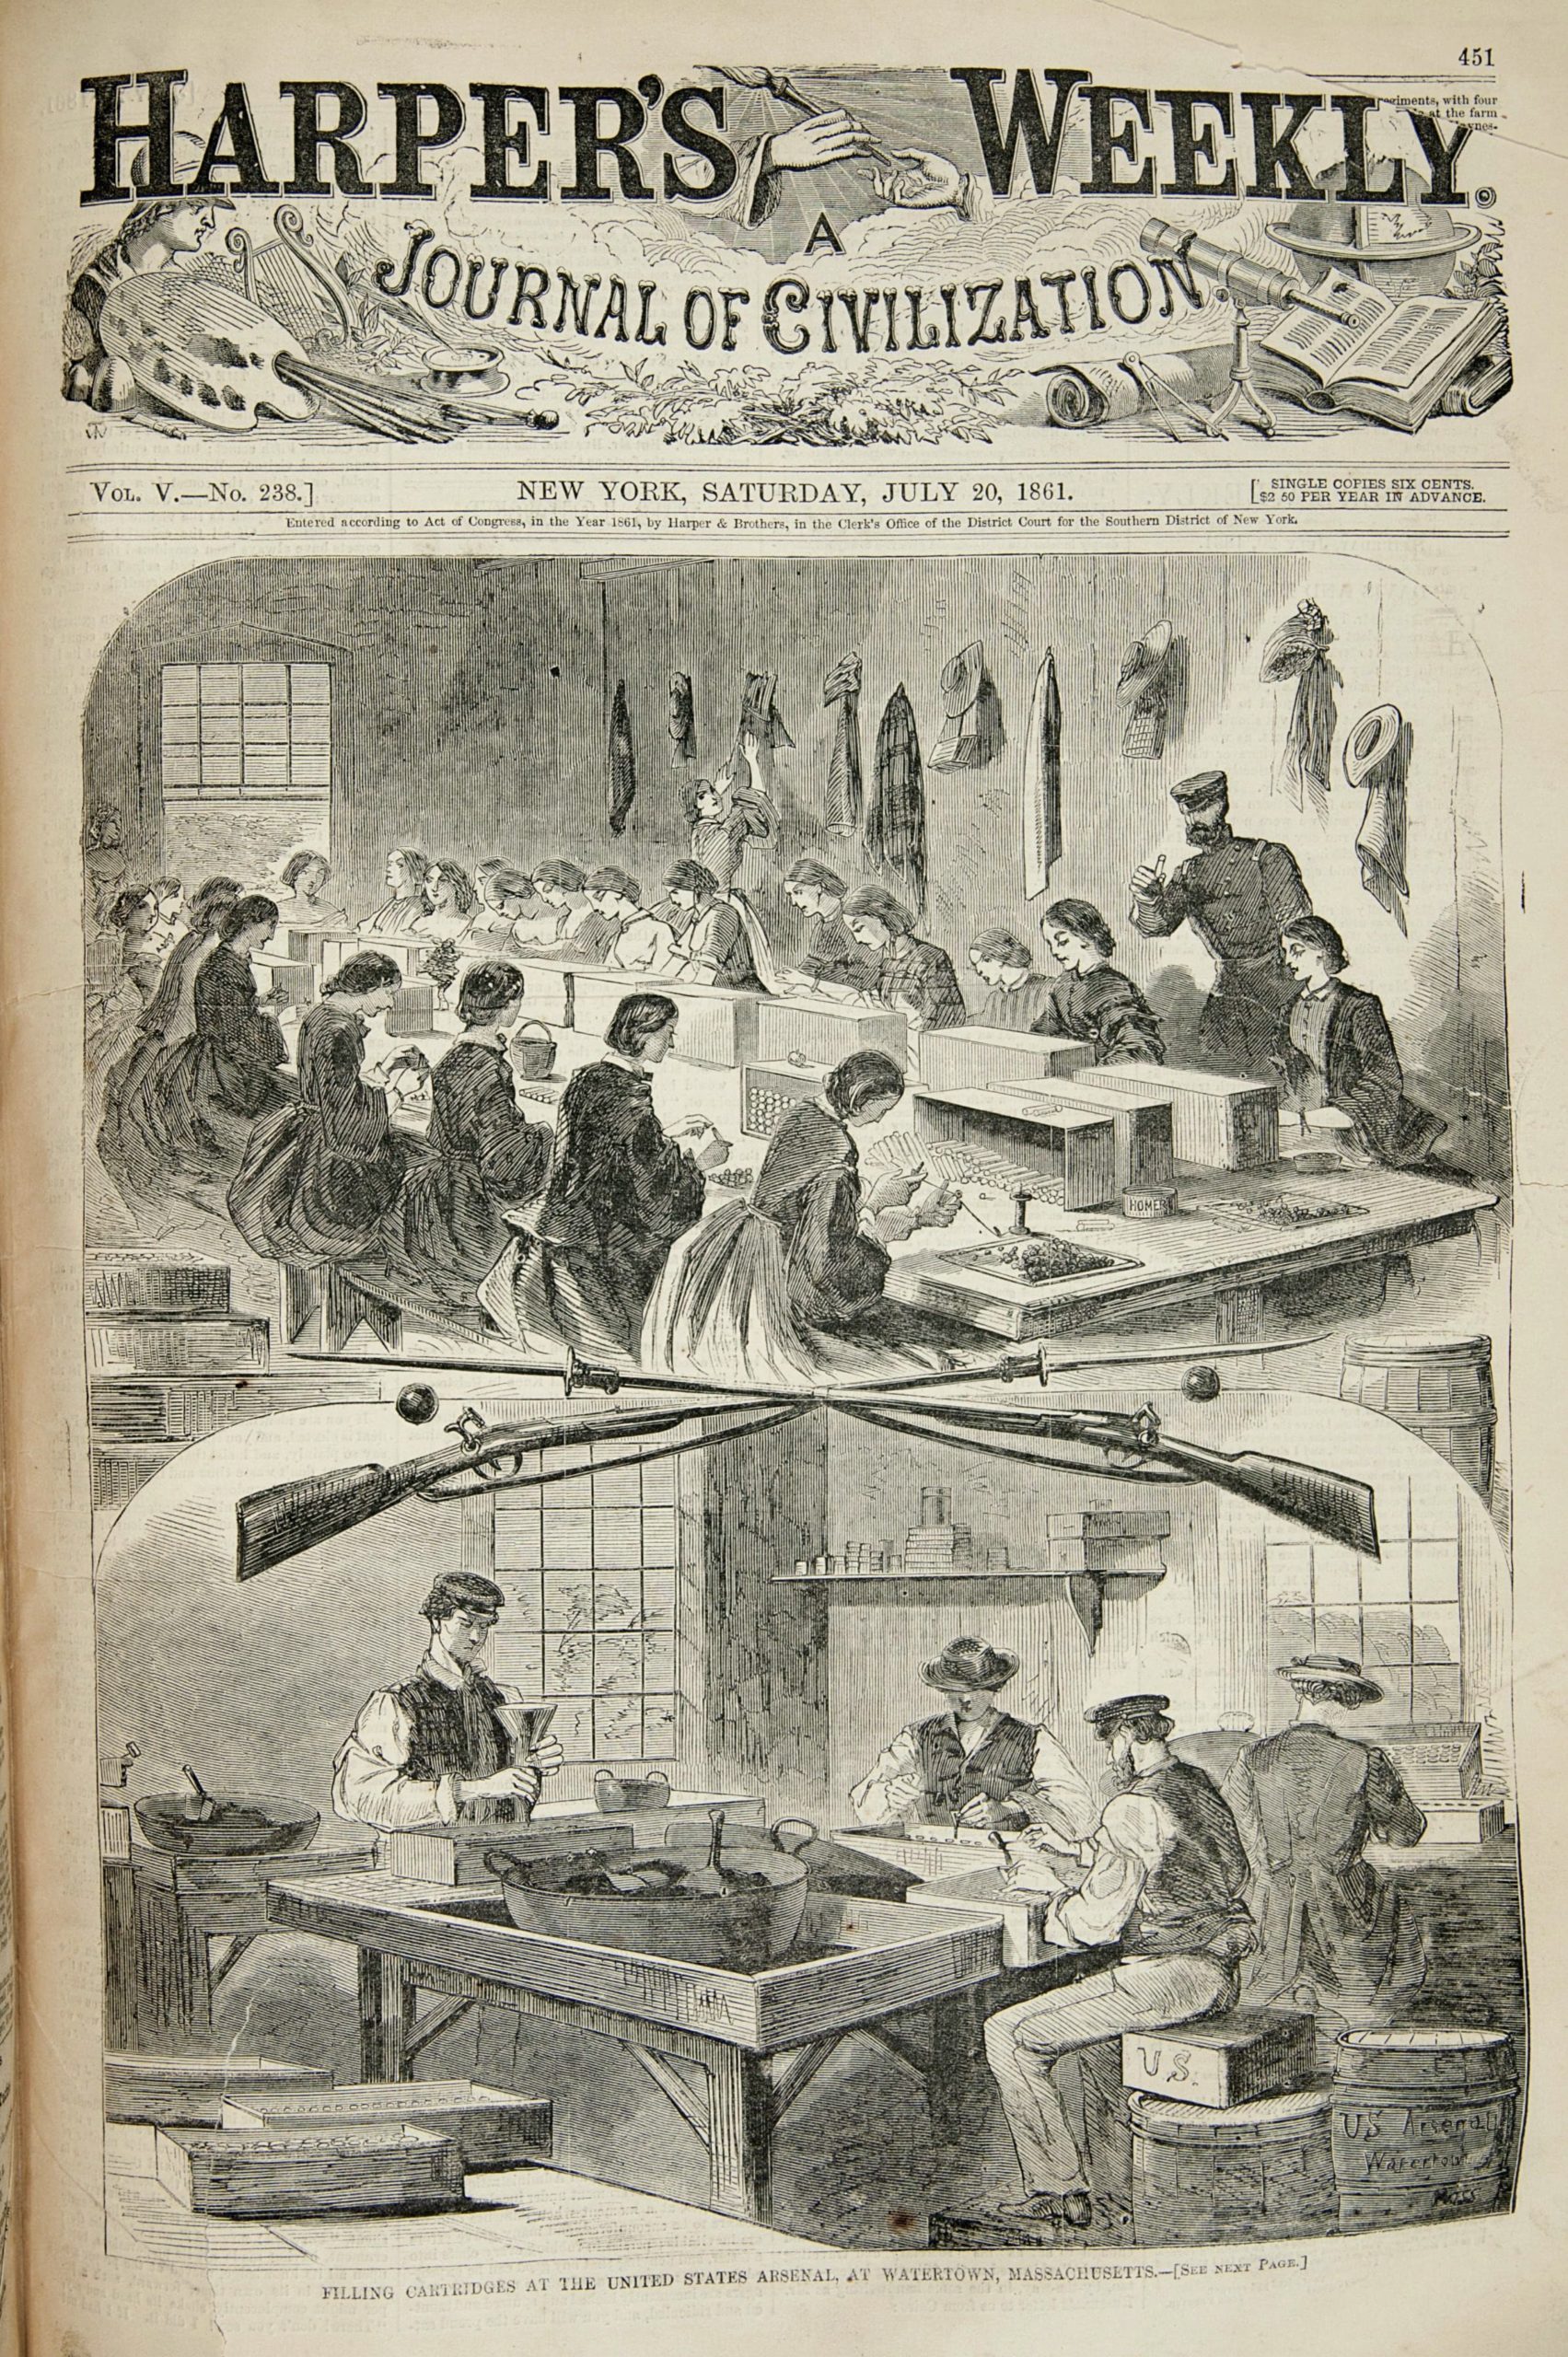 Winslow Homer, Filling Cartridges at the United States Arsenal at Watertown, Massachusetts, published by Harper's Weekly, July 20, 1861, wood engraving on paper, 10 15/16 x 9 1/4 inches (The Art Institute of Chicago)